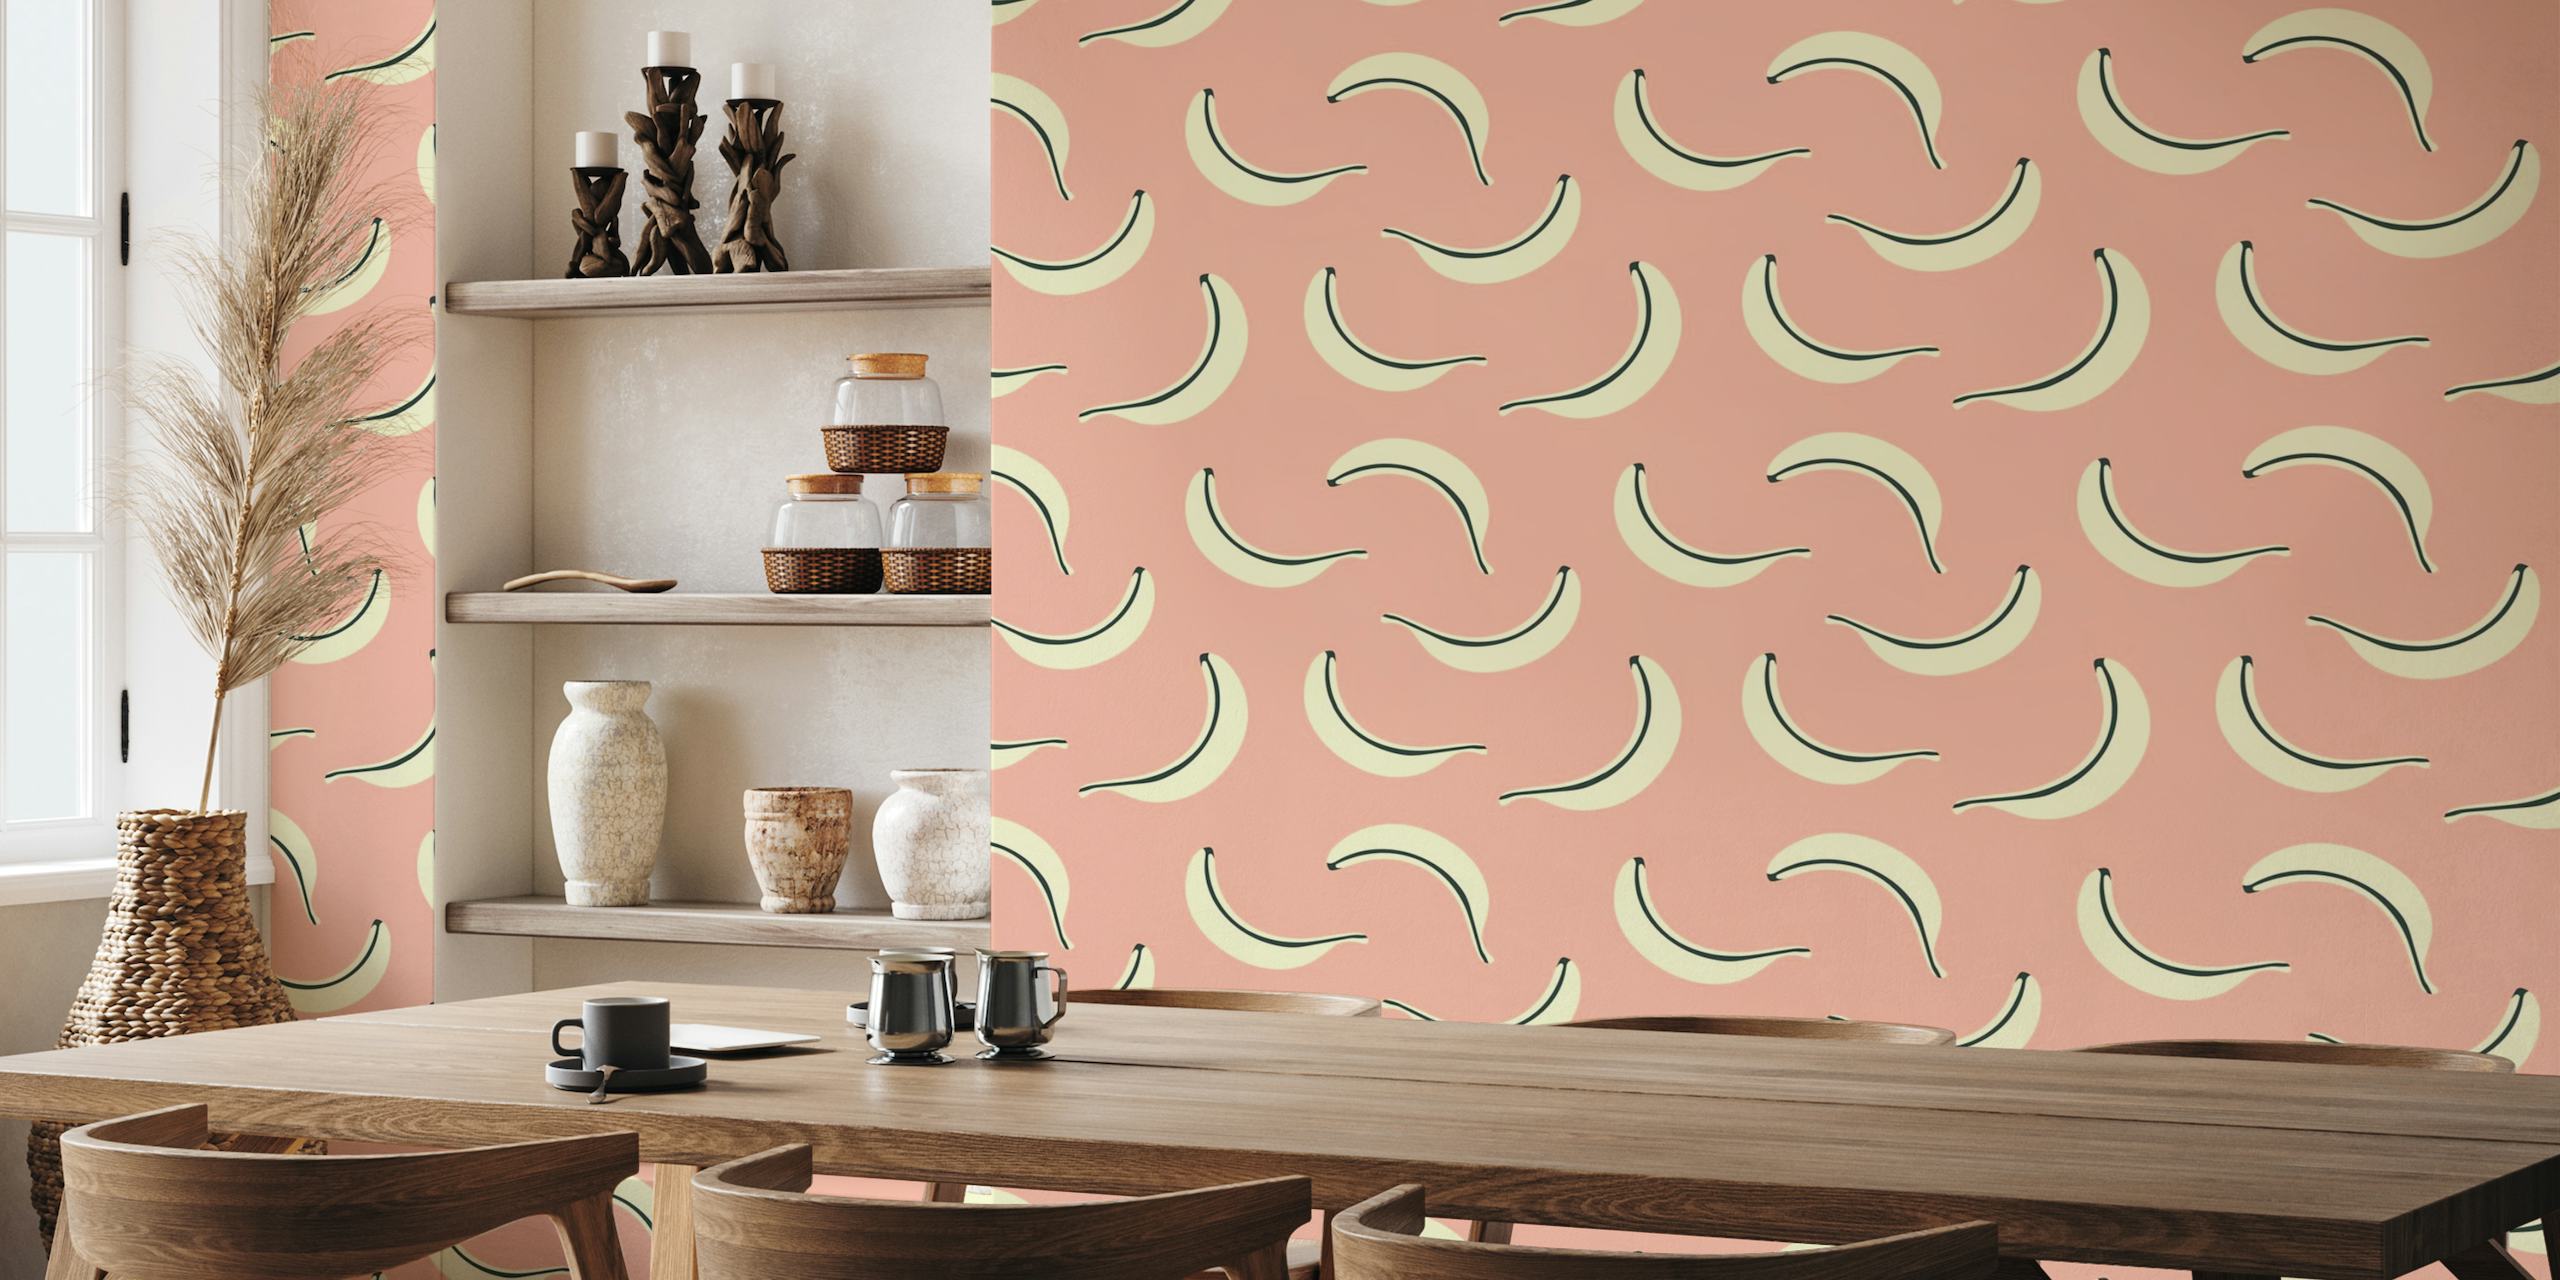 Stylized bananas on a vibrant pink background wall mural